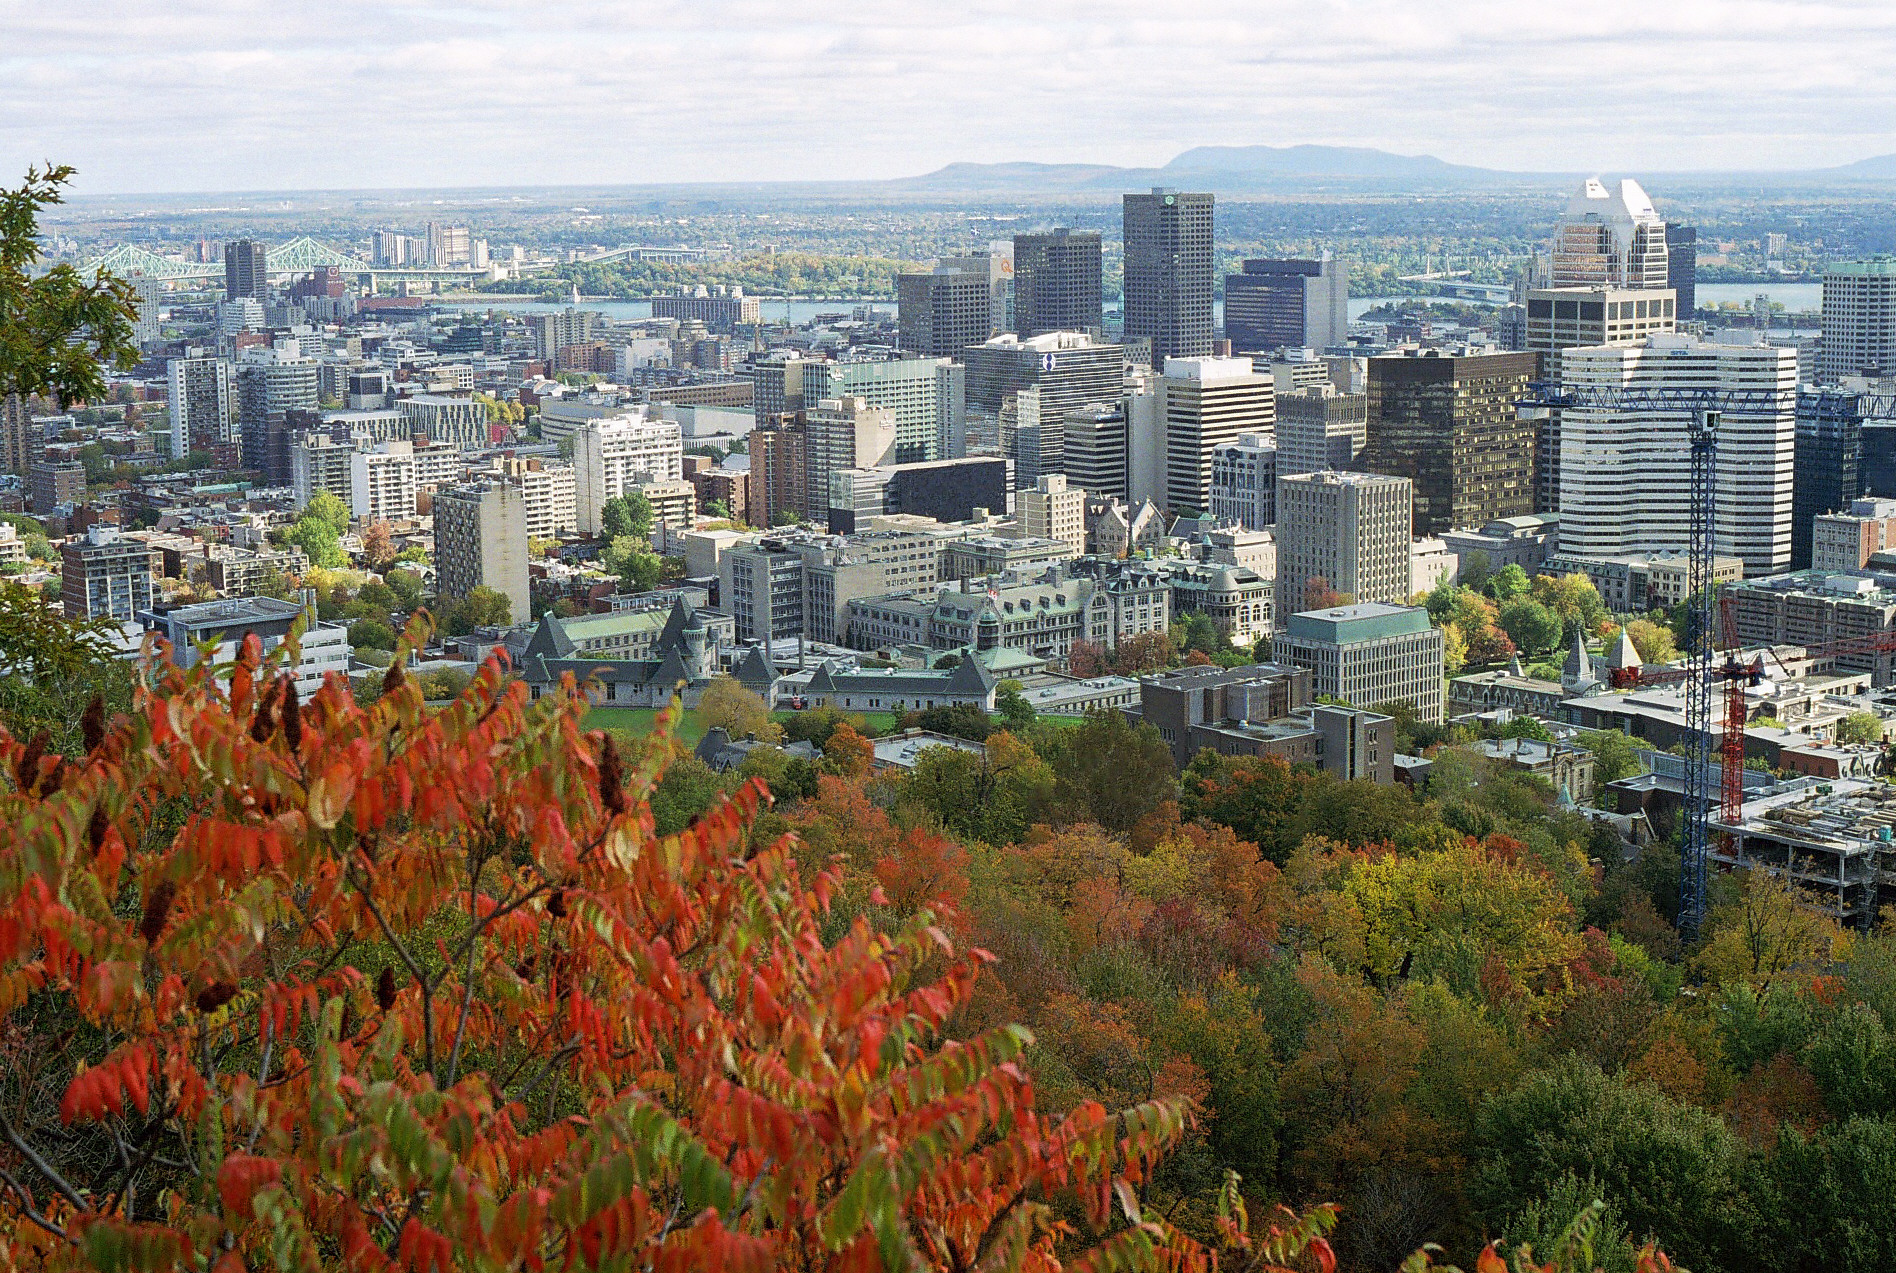 The view on Mount-Royal in fall